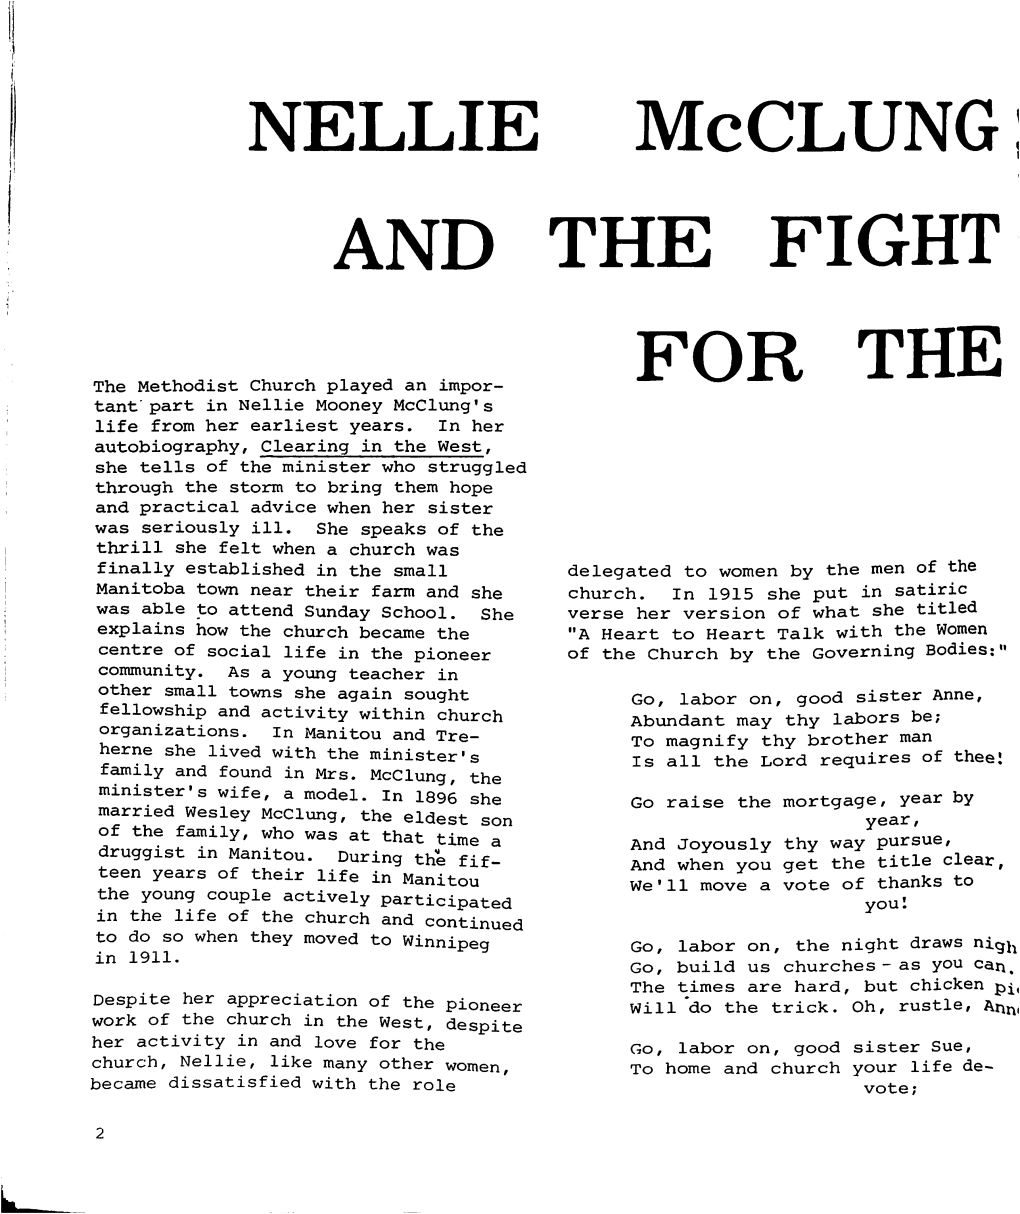 AND the FIGHT for the the Methodist Church Played an Impor Tant' Part in Nellie Mooney Mcclung's Life from Her Earliest Years